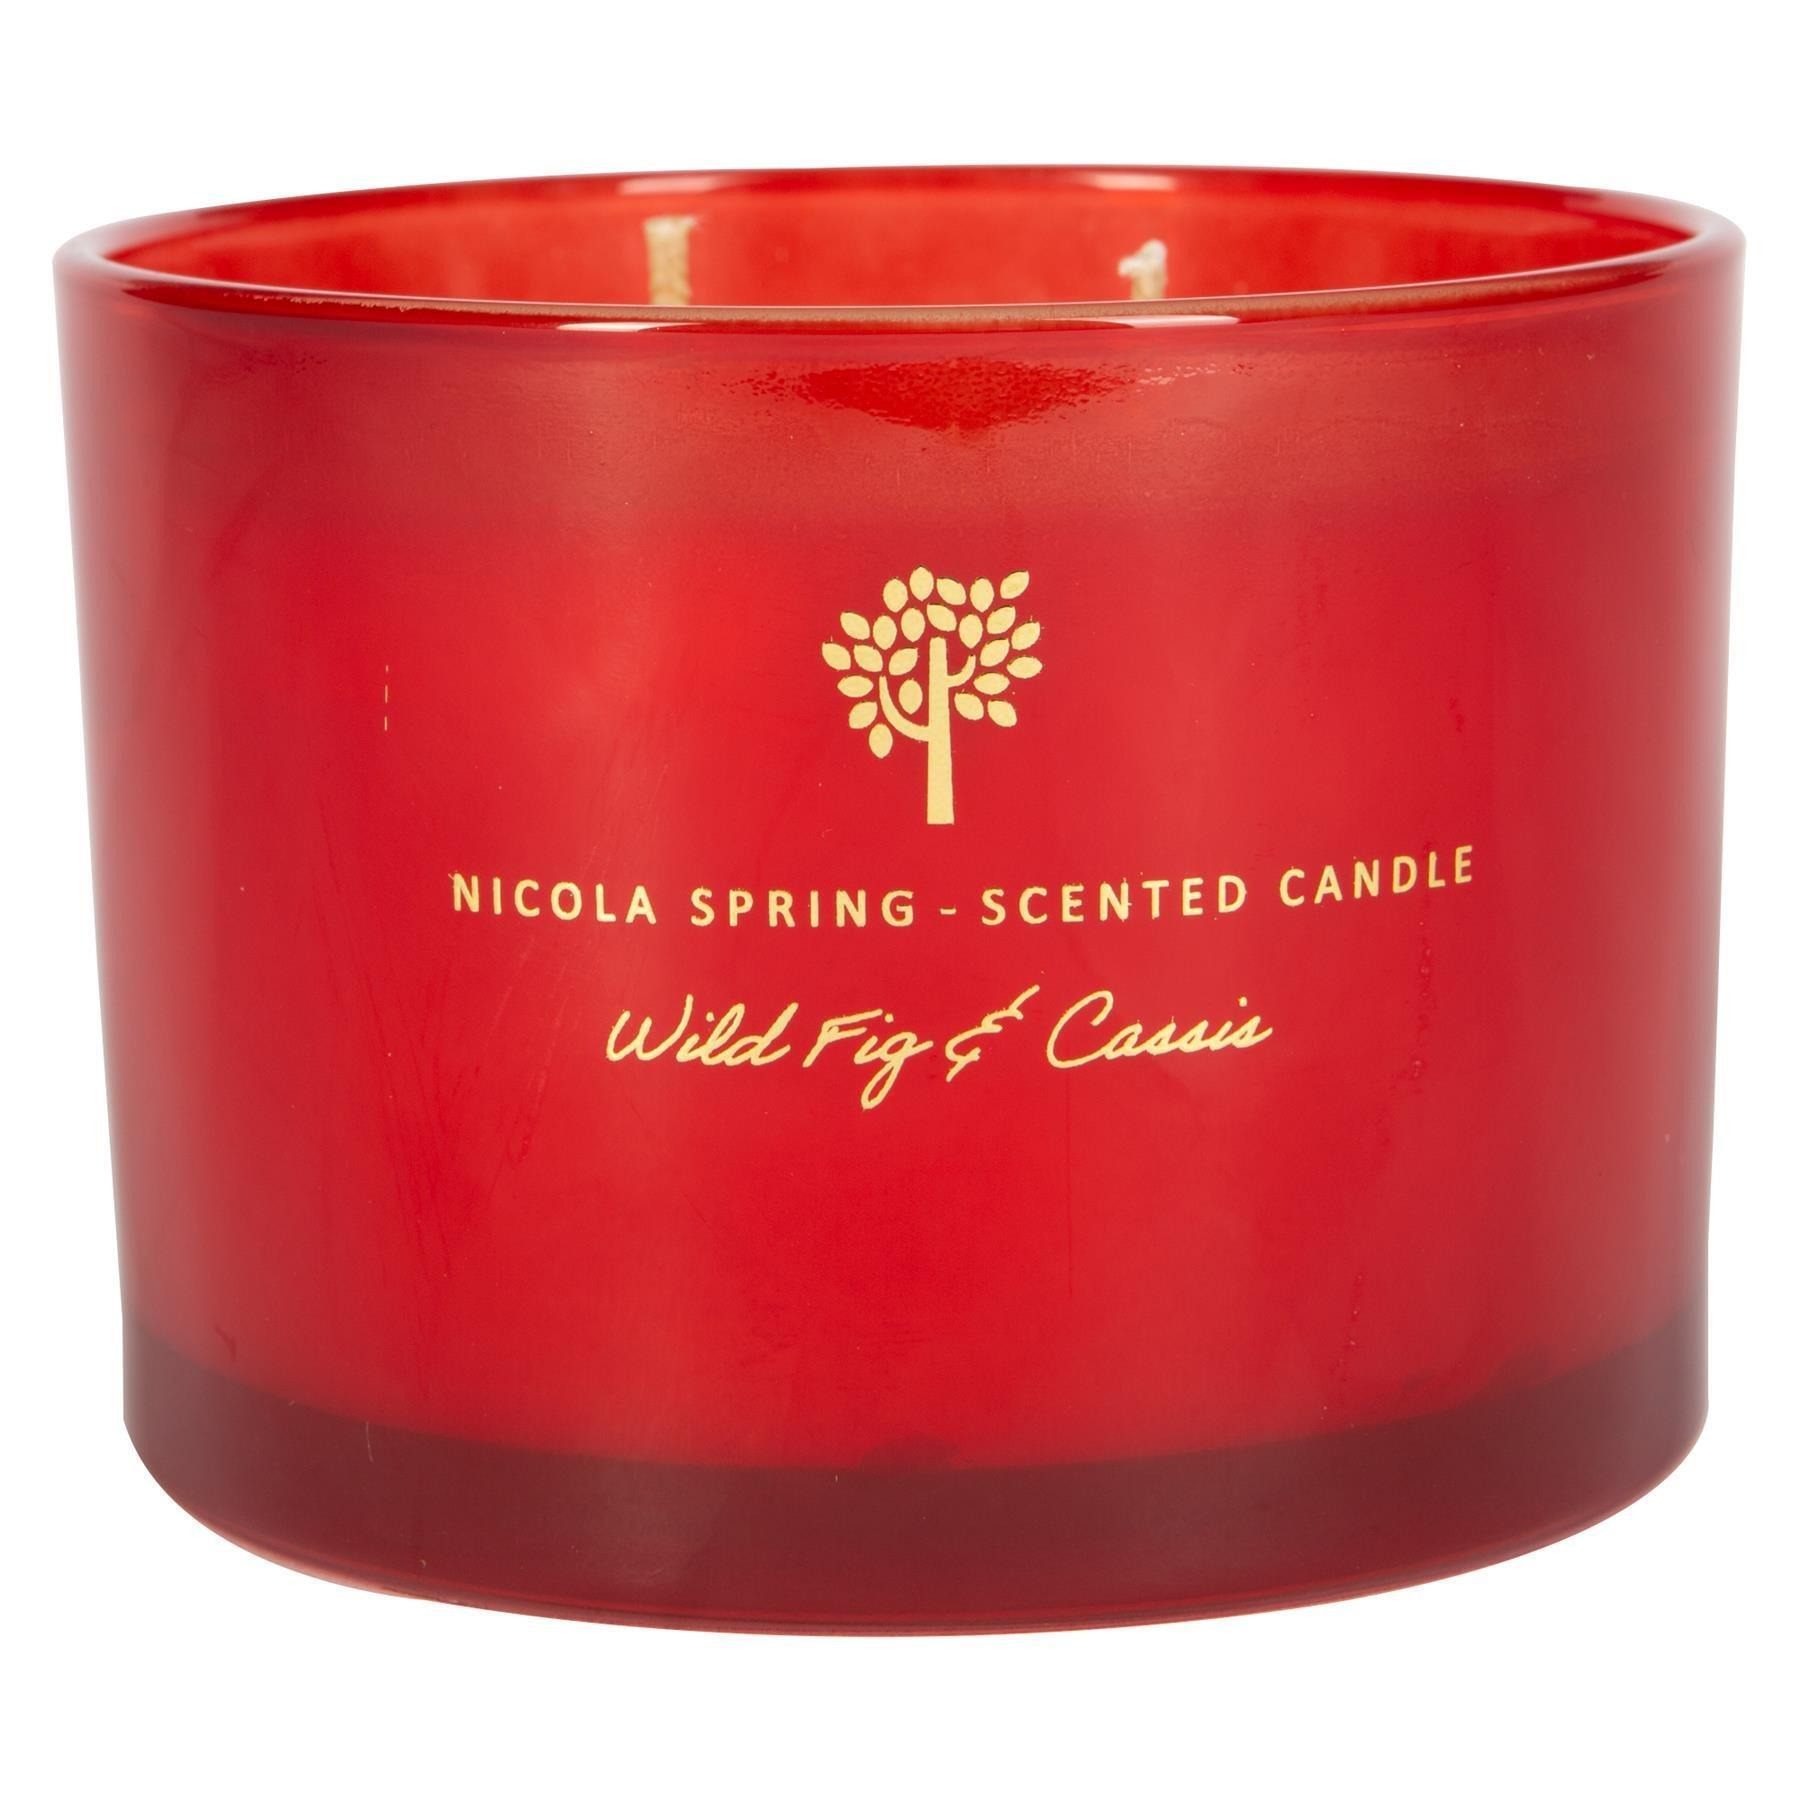 Soy Wax Scented Candle 350g Wild Fig & Cassis - image 1